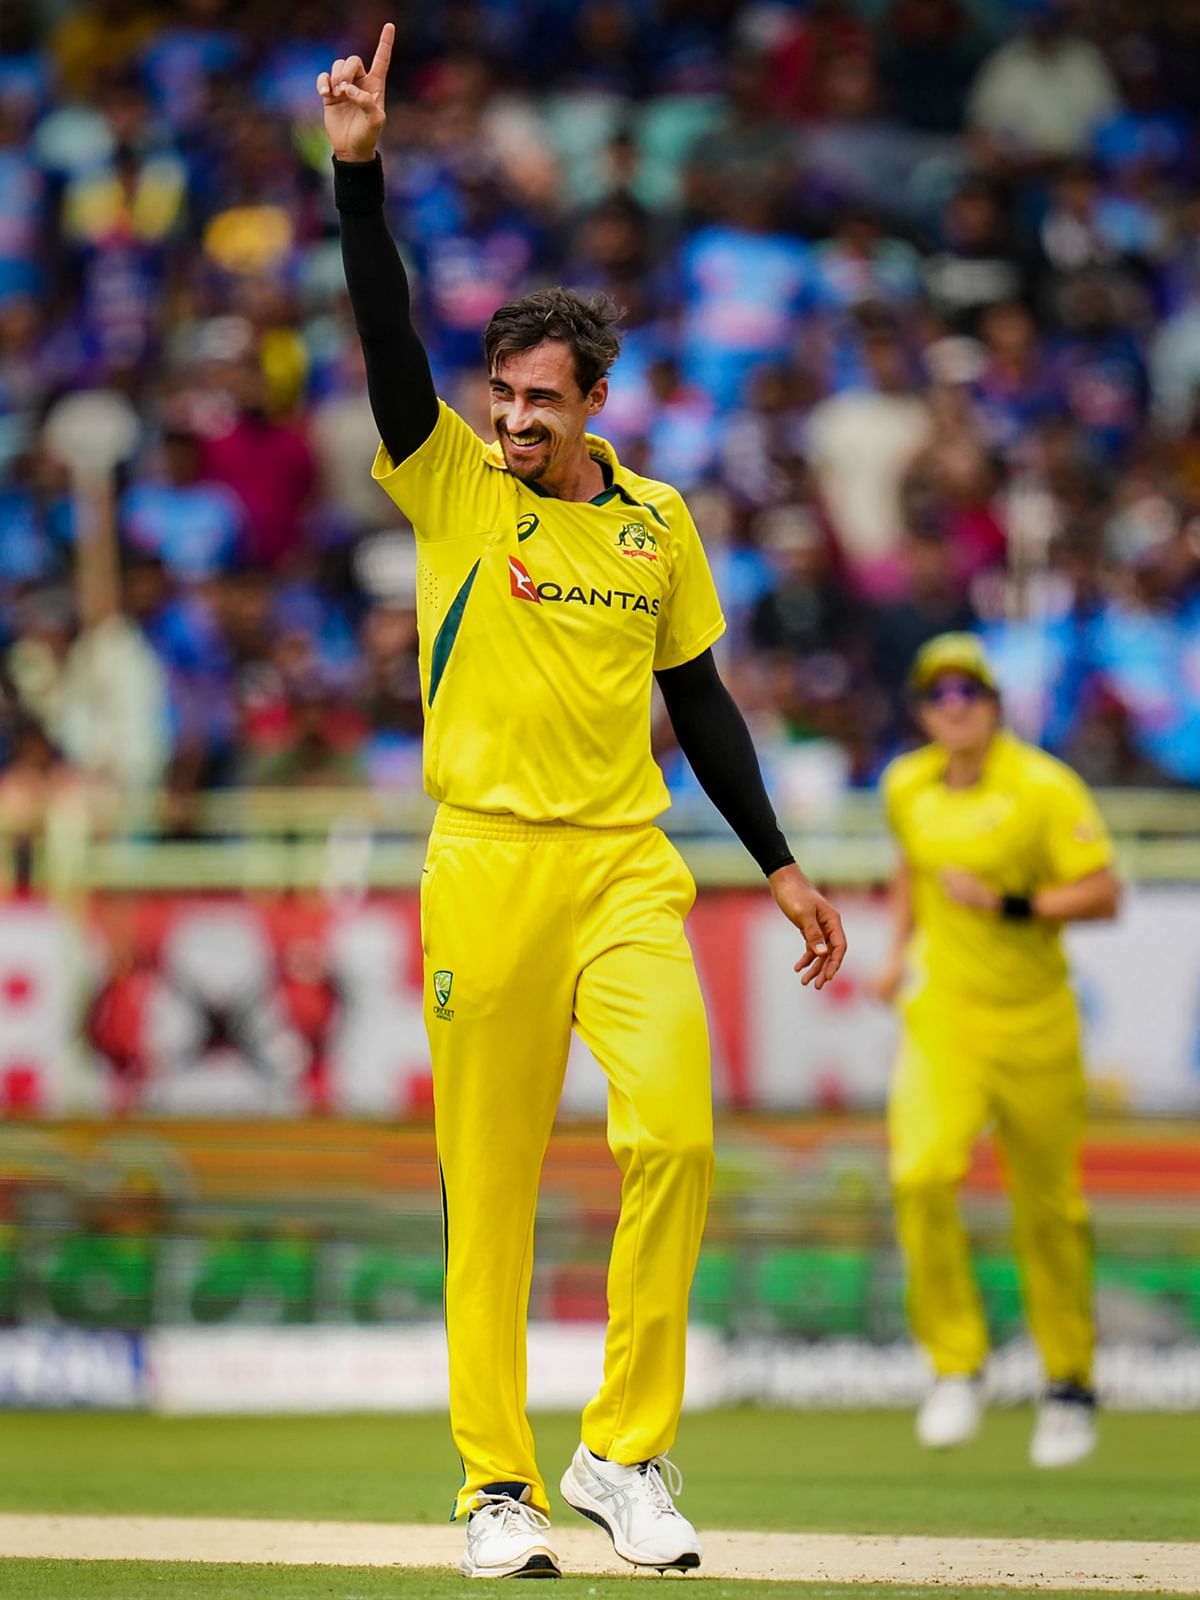 Mitchell Starc will lead the Australian pace attack and is expected to trouble the Pakistan batters with the new ball.